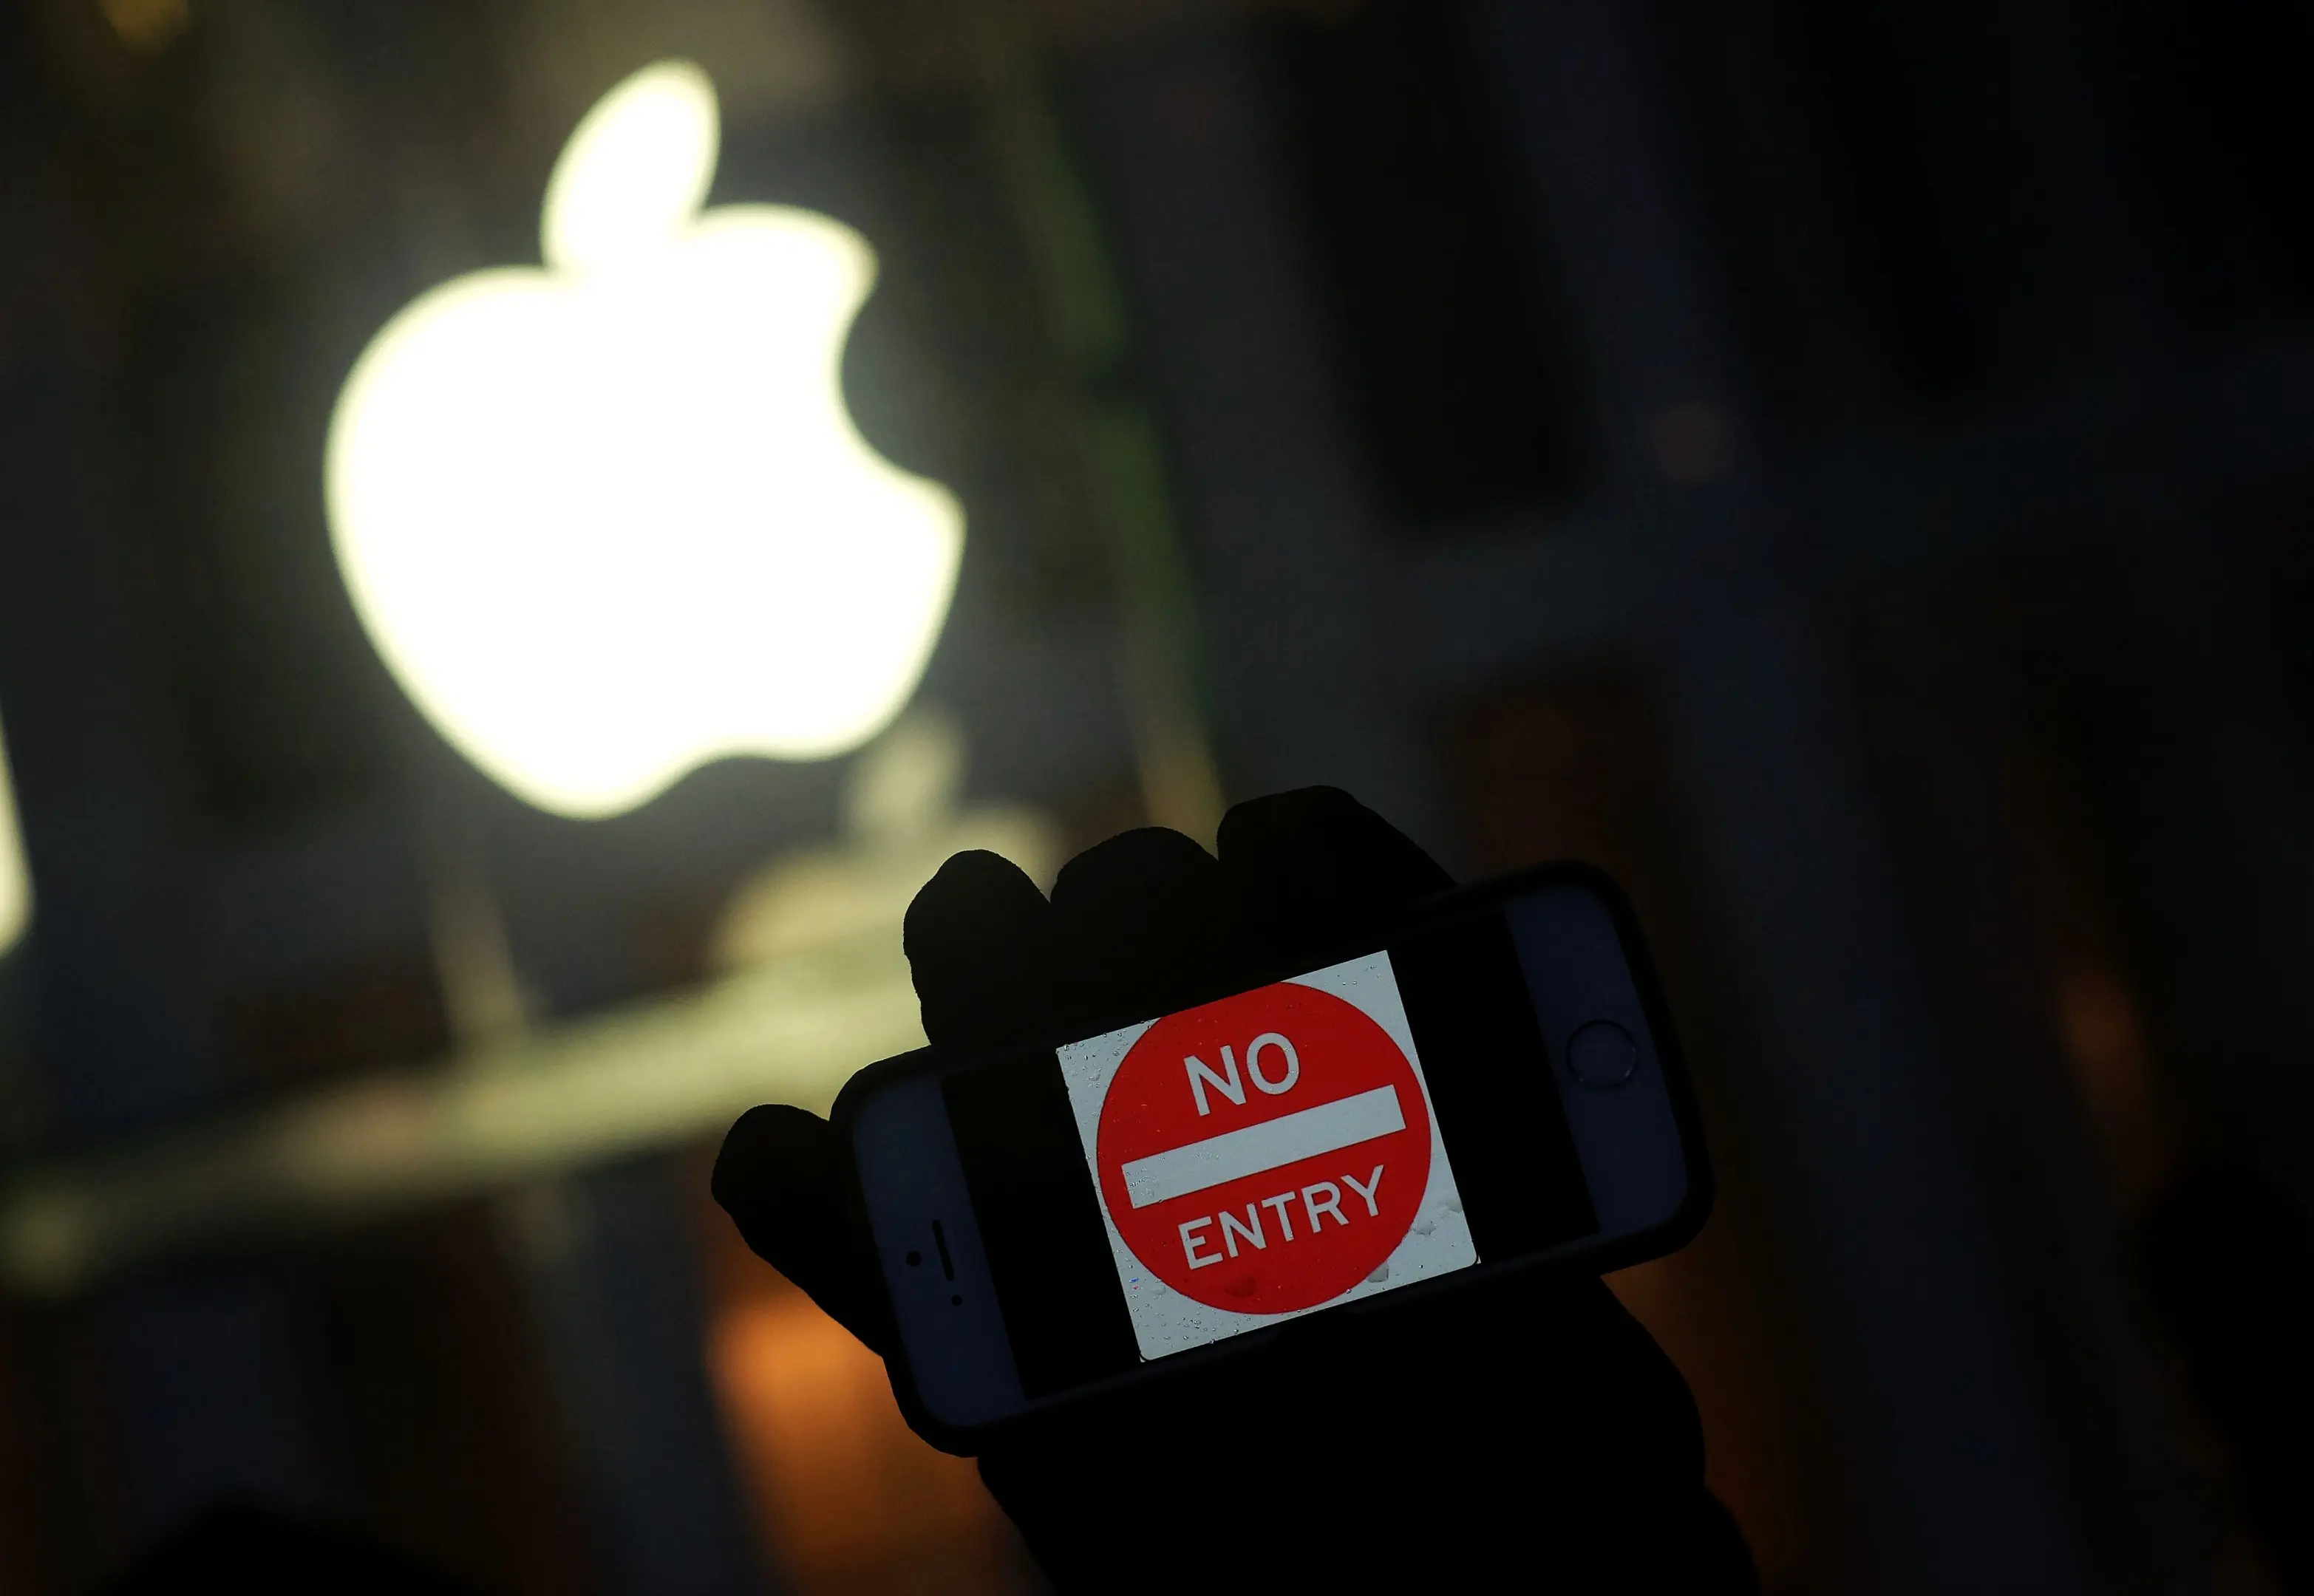 (FILES) This file photo taken on February 23, 2016 shows an anti-government protester holding his iPhone with a sign "No Entry" during a demonstration near the Apple store on Fifth Avenue in New York. The US Justice Department on March 21, 2016 filed a request to postpone a crucial hearing with Apple on accessing the iPhone of one of the San Bernardino attackers, citing new leads in the case. "On Sunday, March 20, 2016, an outside party demonstrated to the FBI a possible method for unlocking (Syed) Farook's iPhone, " prosecutors said in a filing. "Testing is required to determine whether it is a viable method that will not compromise data on Farook's iPhone. "If the method is viable, it should eliminate the need for the assistance from Apple Inc. set forth in the All Writs Act Order in this case." Prosecutors requested that Tuesday's hearing before a federal judge in California be cancelled in order to allow time for testing the new method, and proposed filing a status report with the court by April 5. The high-stakes case has pitted Apple against the FBI, which sought the tech giant's help in unlocking the iPhone of Farook, who, along with his wife, was behind the December 2 terror attack in San Bernardino that left 14 people dead. jz/oh / AFP PHOTO / Jewel Samad